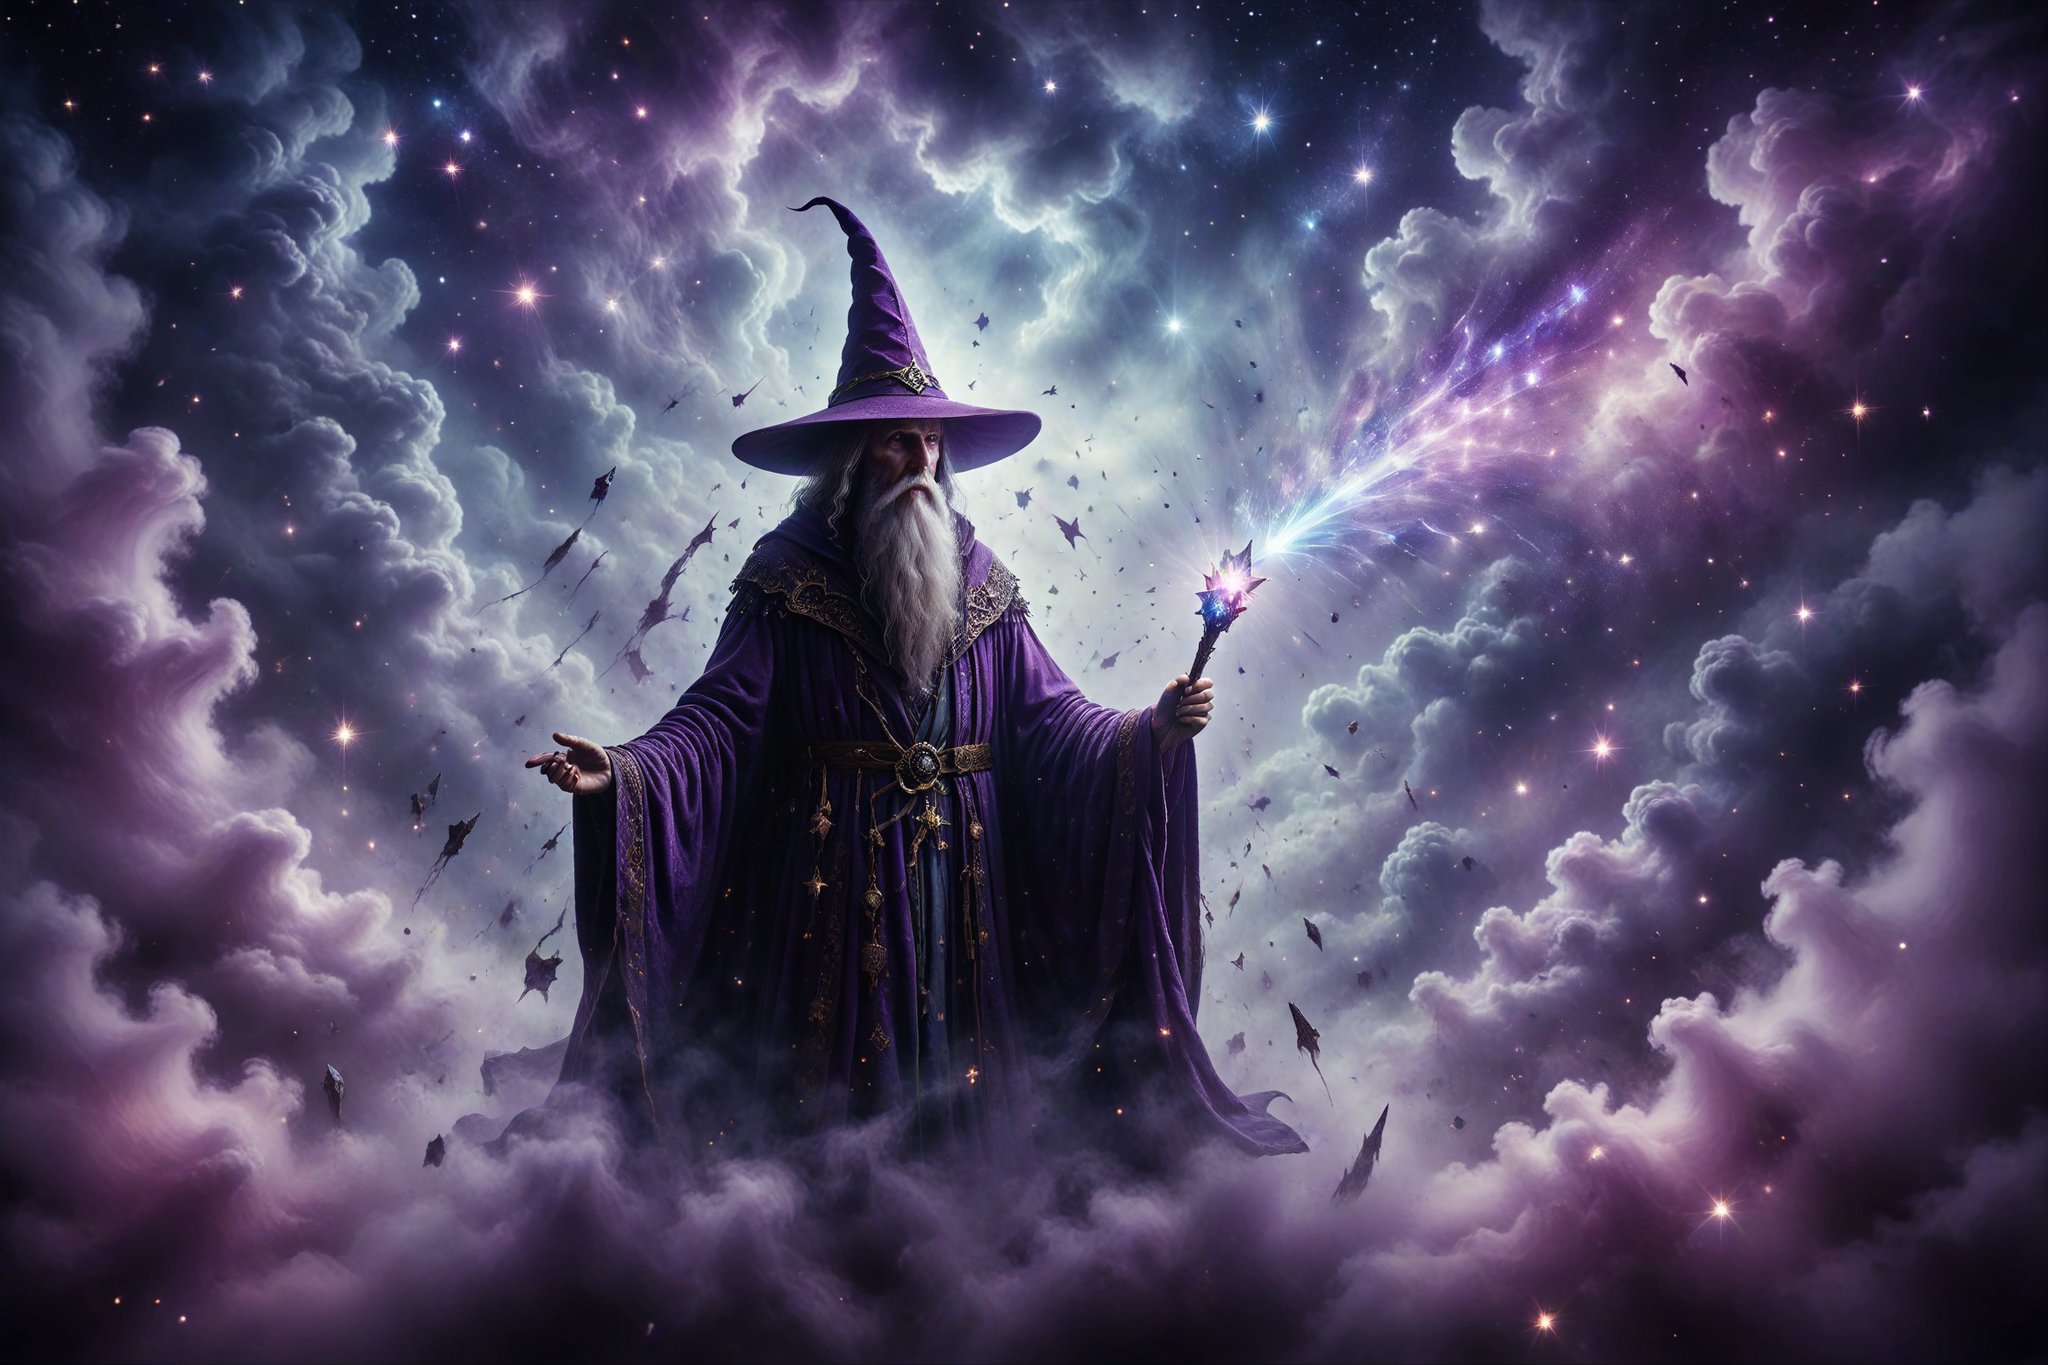 A wizard with a pointed hat and starry robe, holding a crystal scepter emitting flashes of iridescent light, summoning dreamlike creatures among clouds of violet mist.